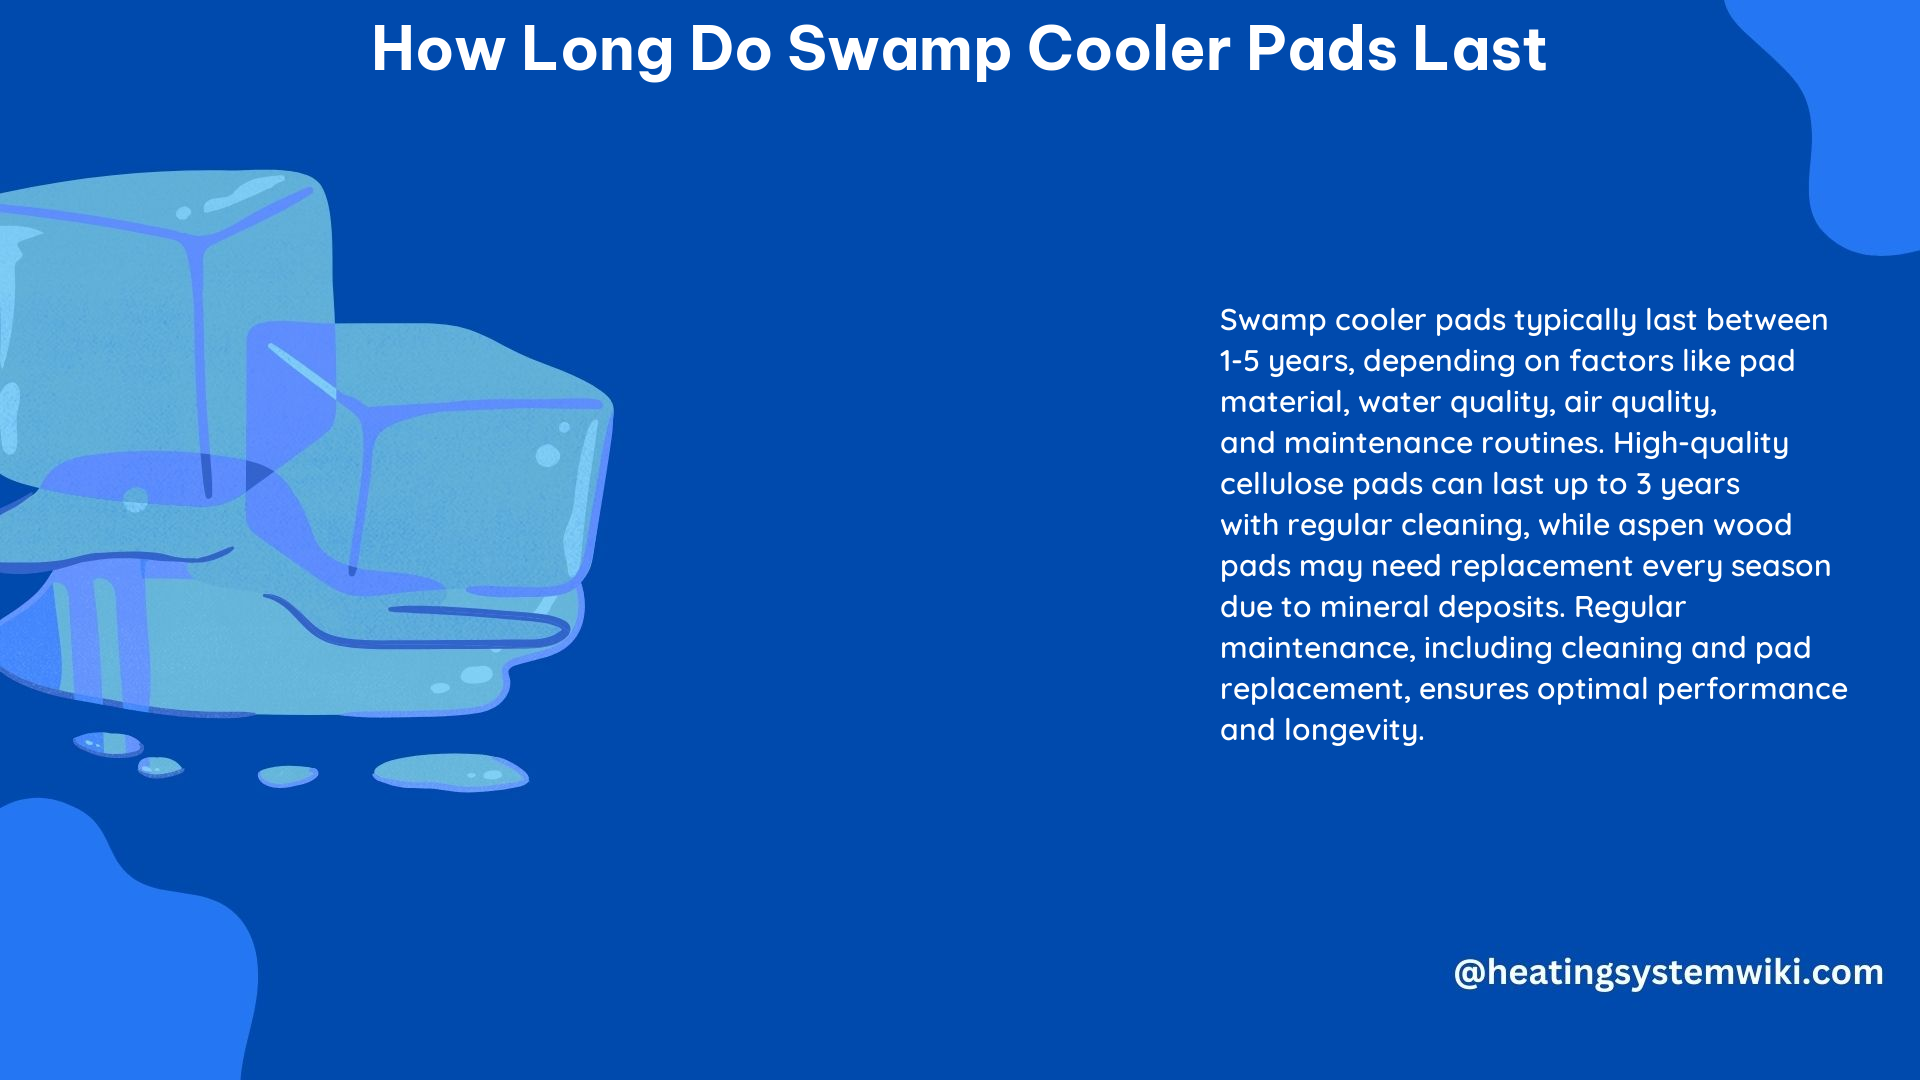 How Long Do Swamp Cooler Pads Last